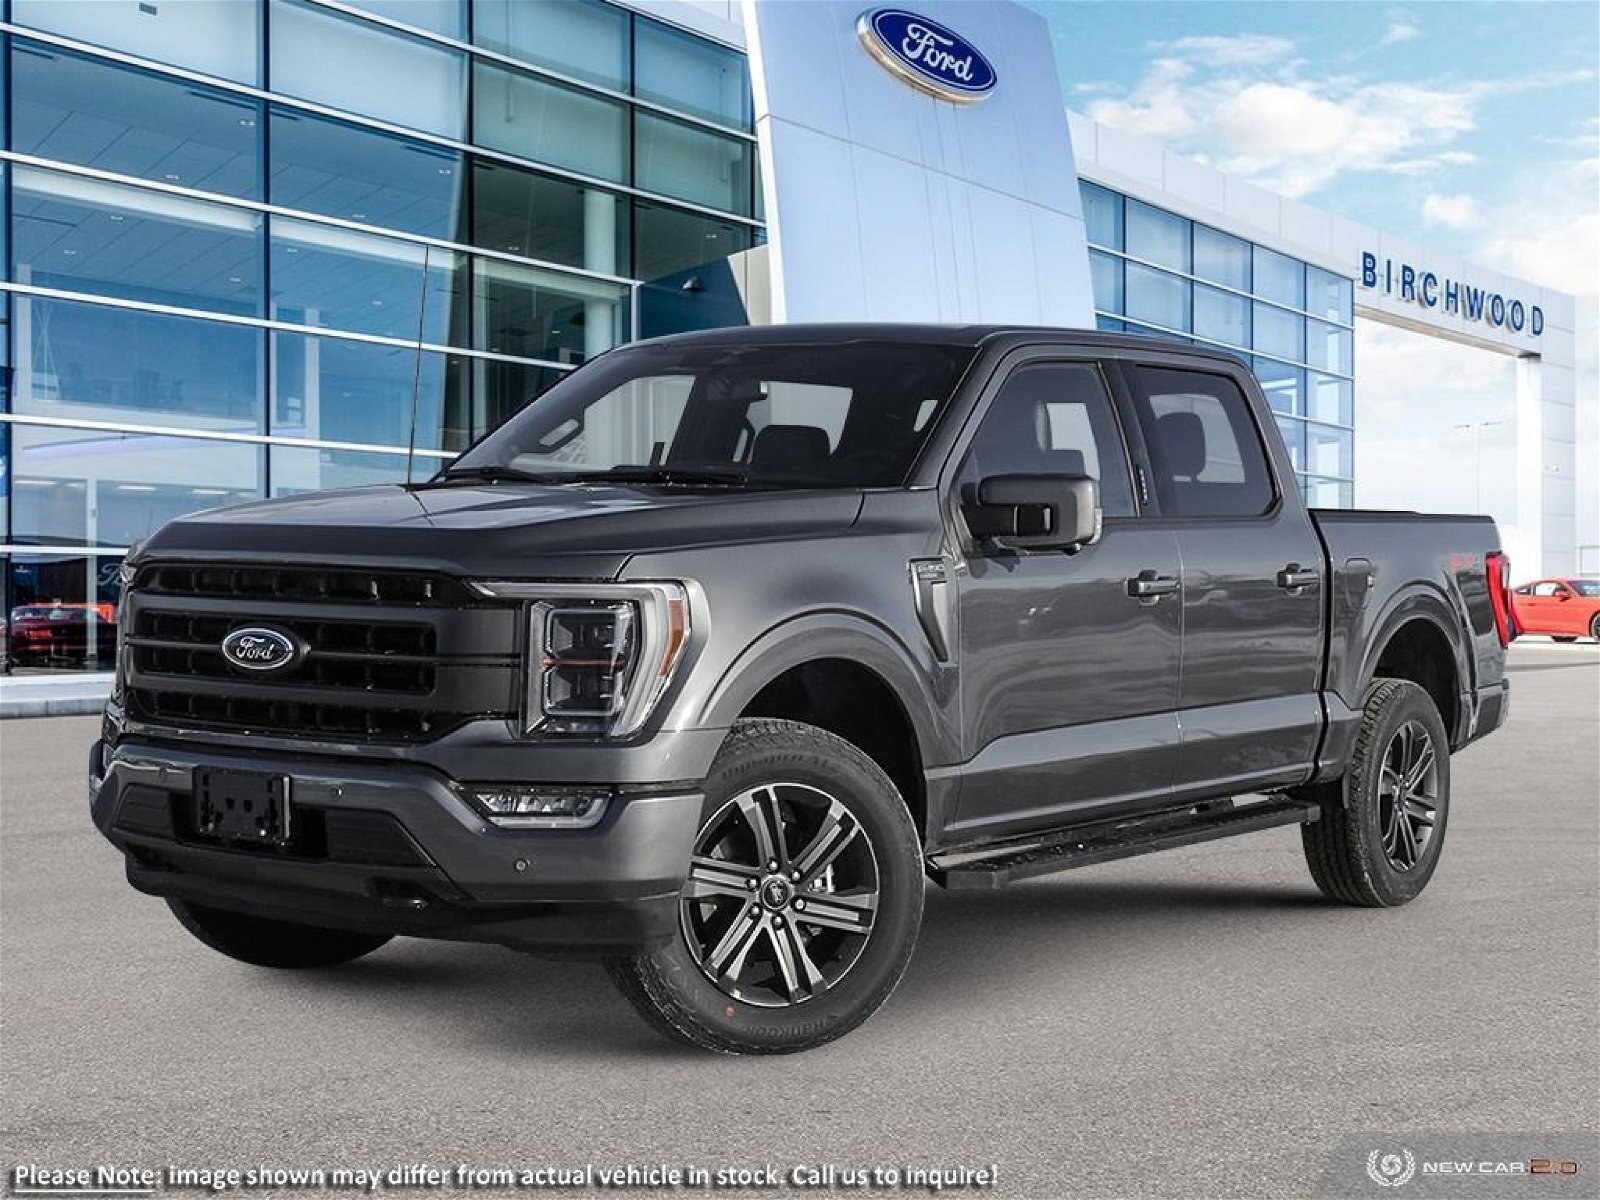 2023 Ford F-150 LARIAT DEMO Blowout - $14201 OFF